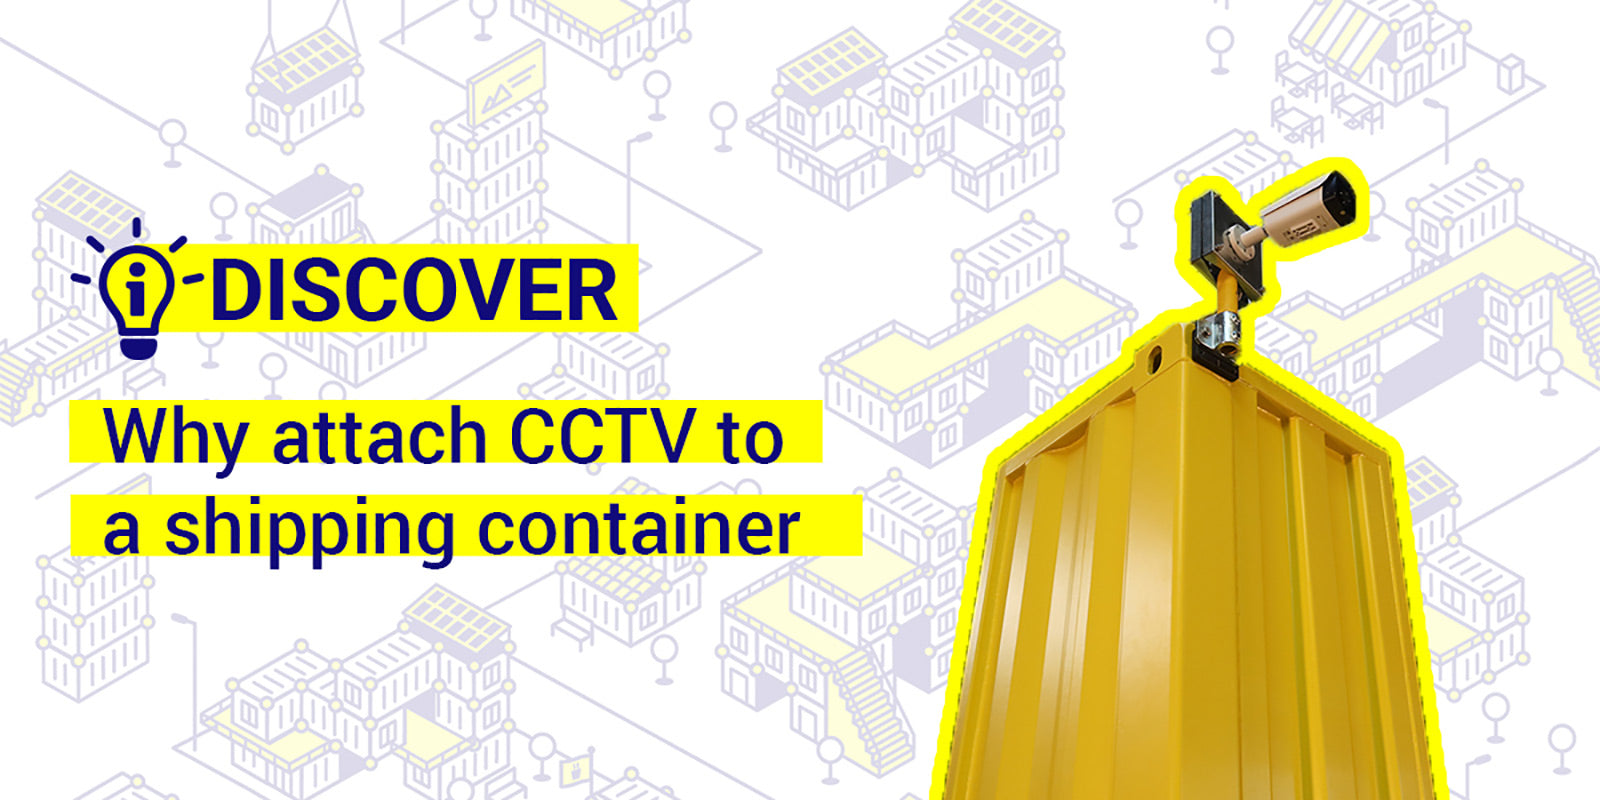 Why attach CCTV to a shipping container